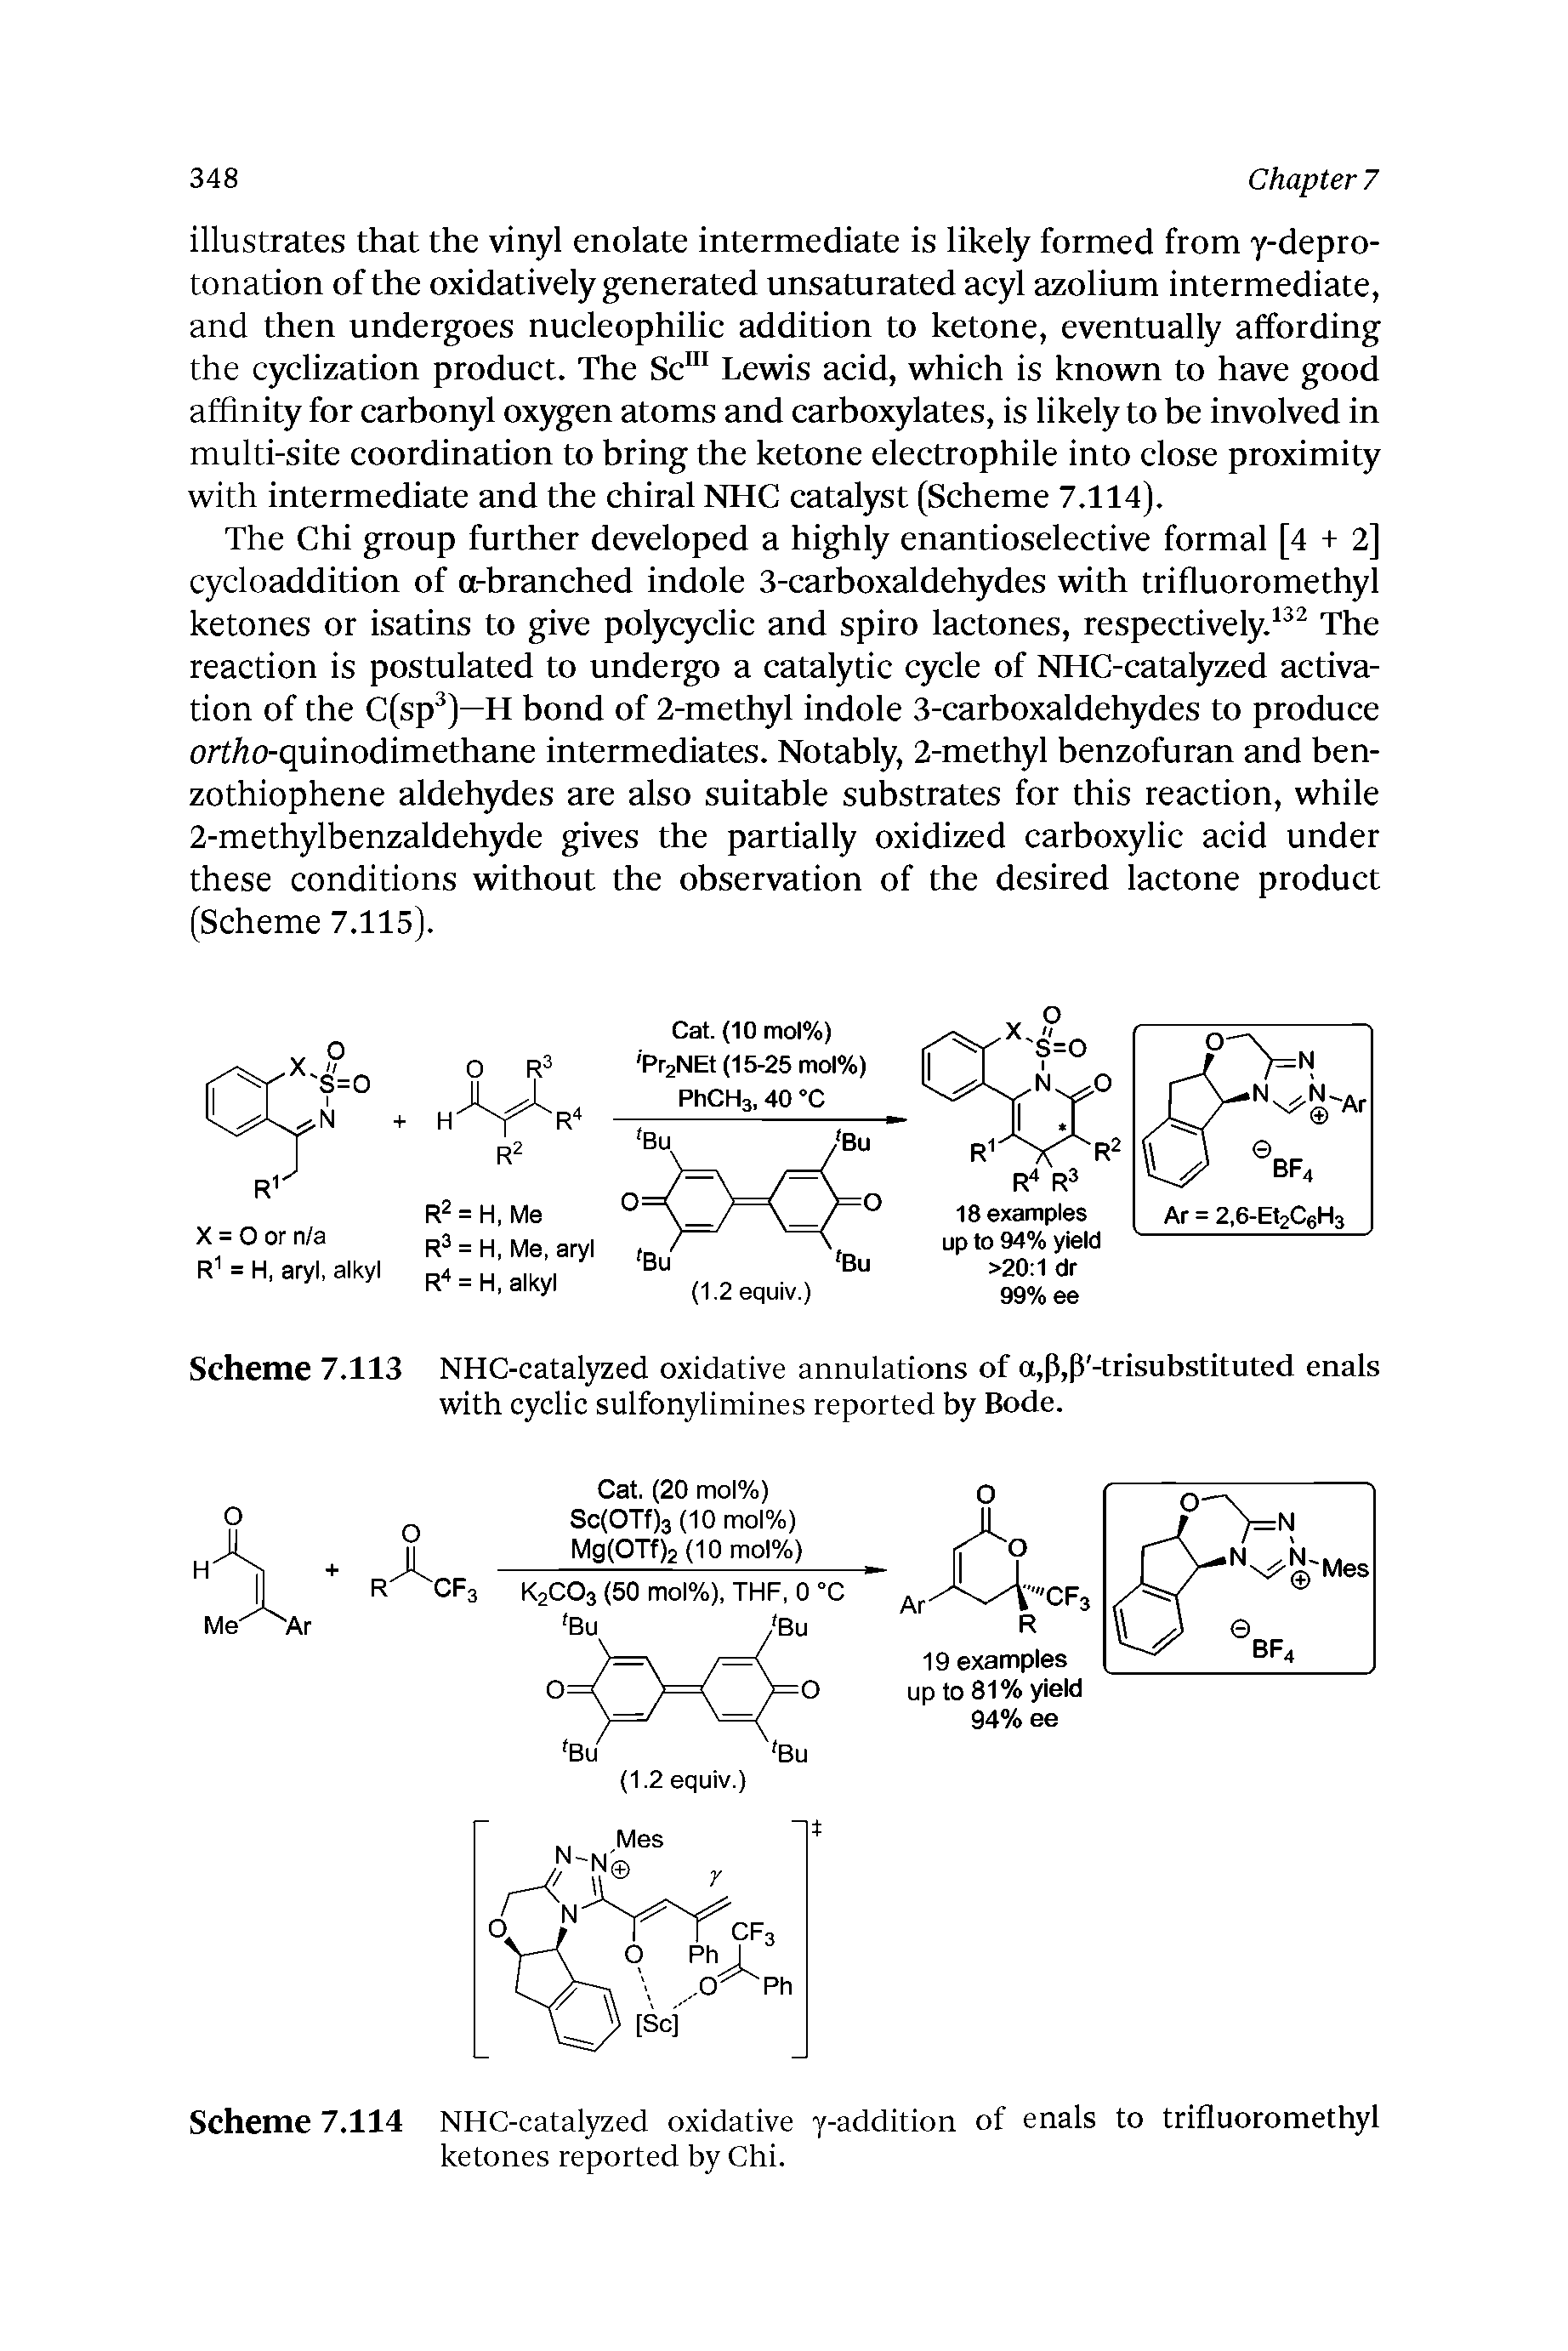 Scheme 7.113 NHC-catalyzed oxidative annulations of a,p,P -trisubstituted enals with cyclic sulfonylimines reported by Bode.